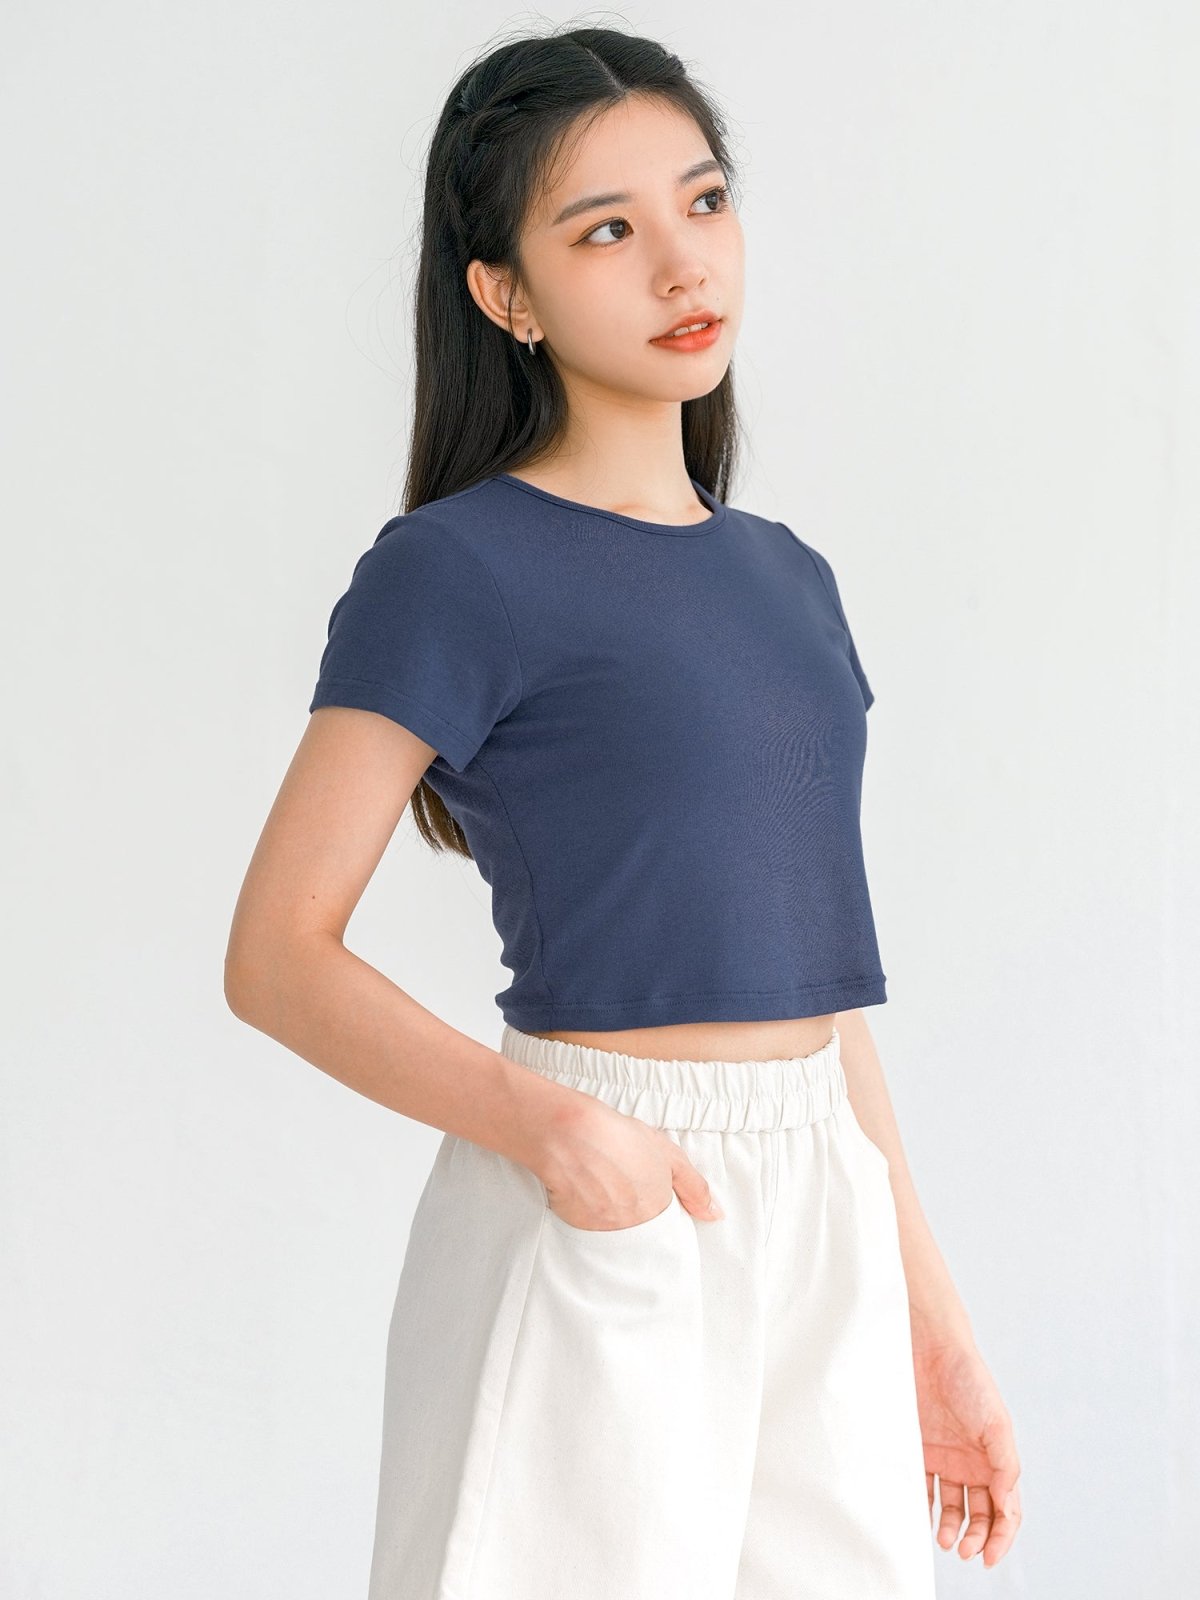 Everyday Stretchy Crop Tee (7 Colours) - DAG-DD0407-23NavyS - Ash Navy - S - D'ZAGE Designs